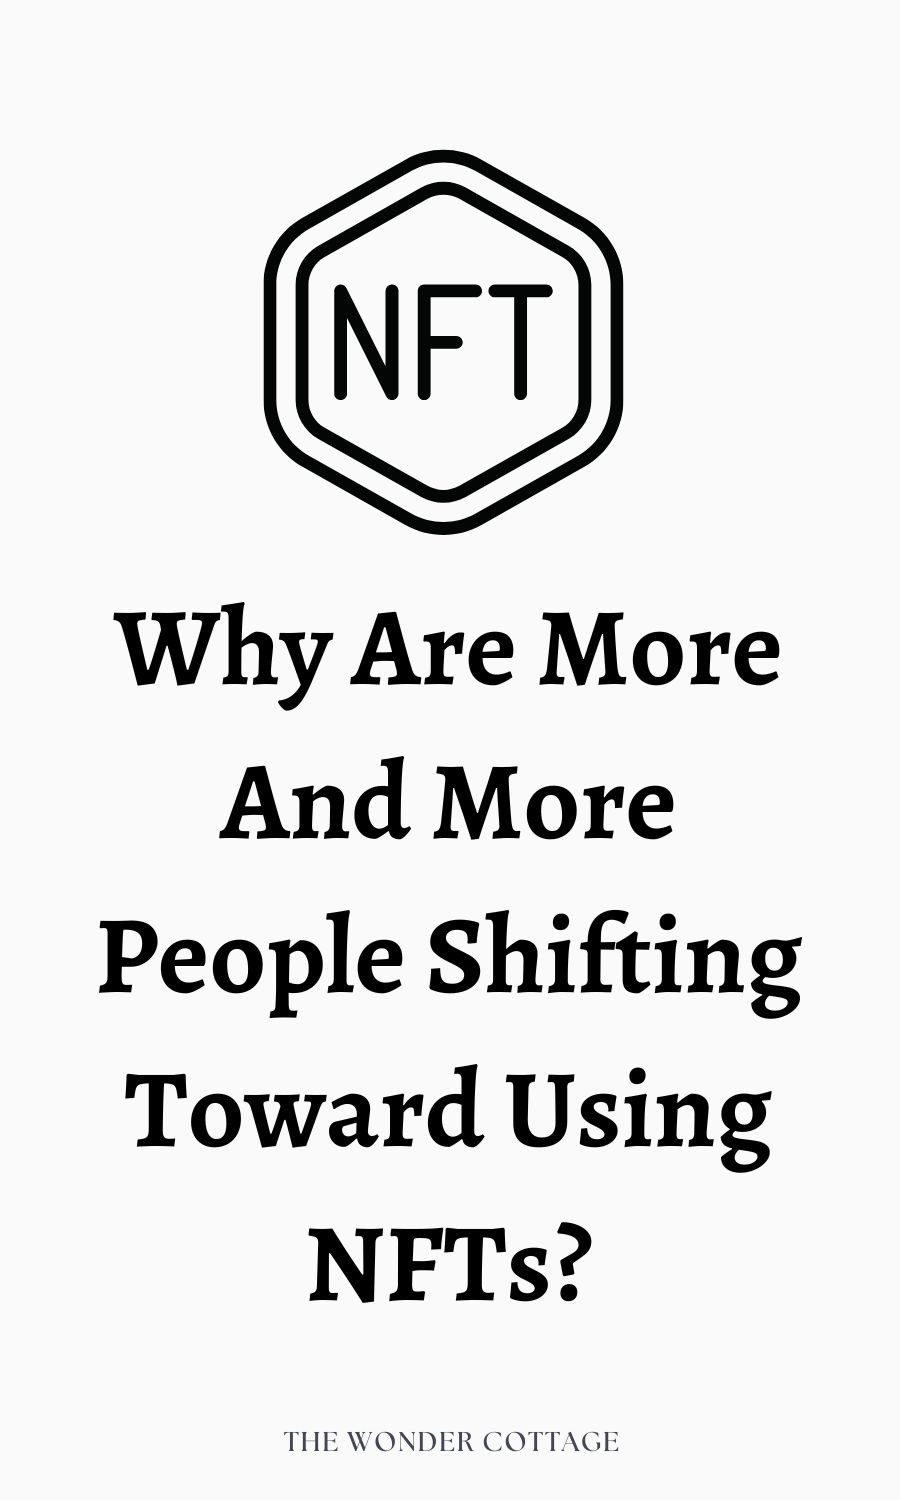 Why Are More And More People Shifting Toward Using NFTs?